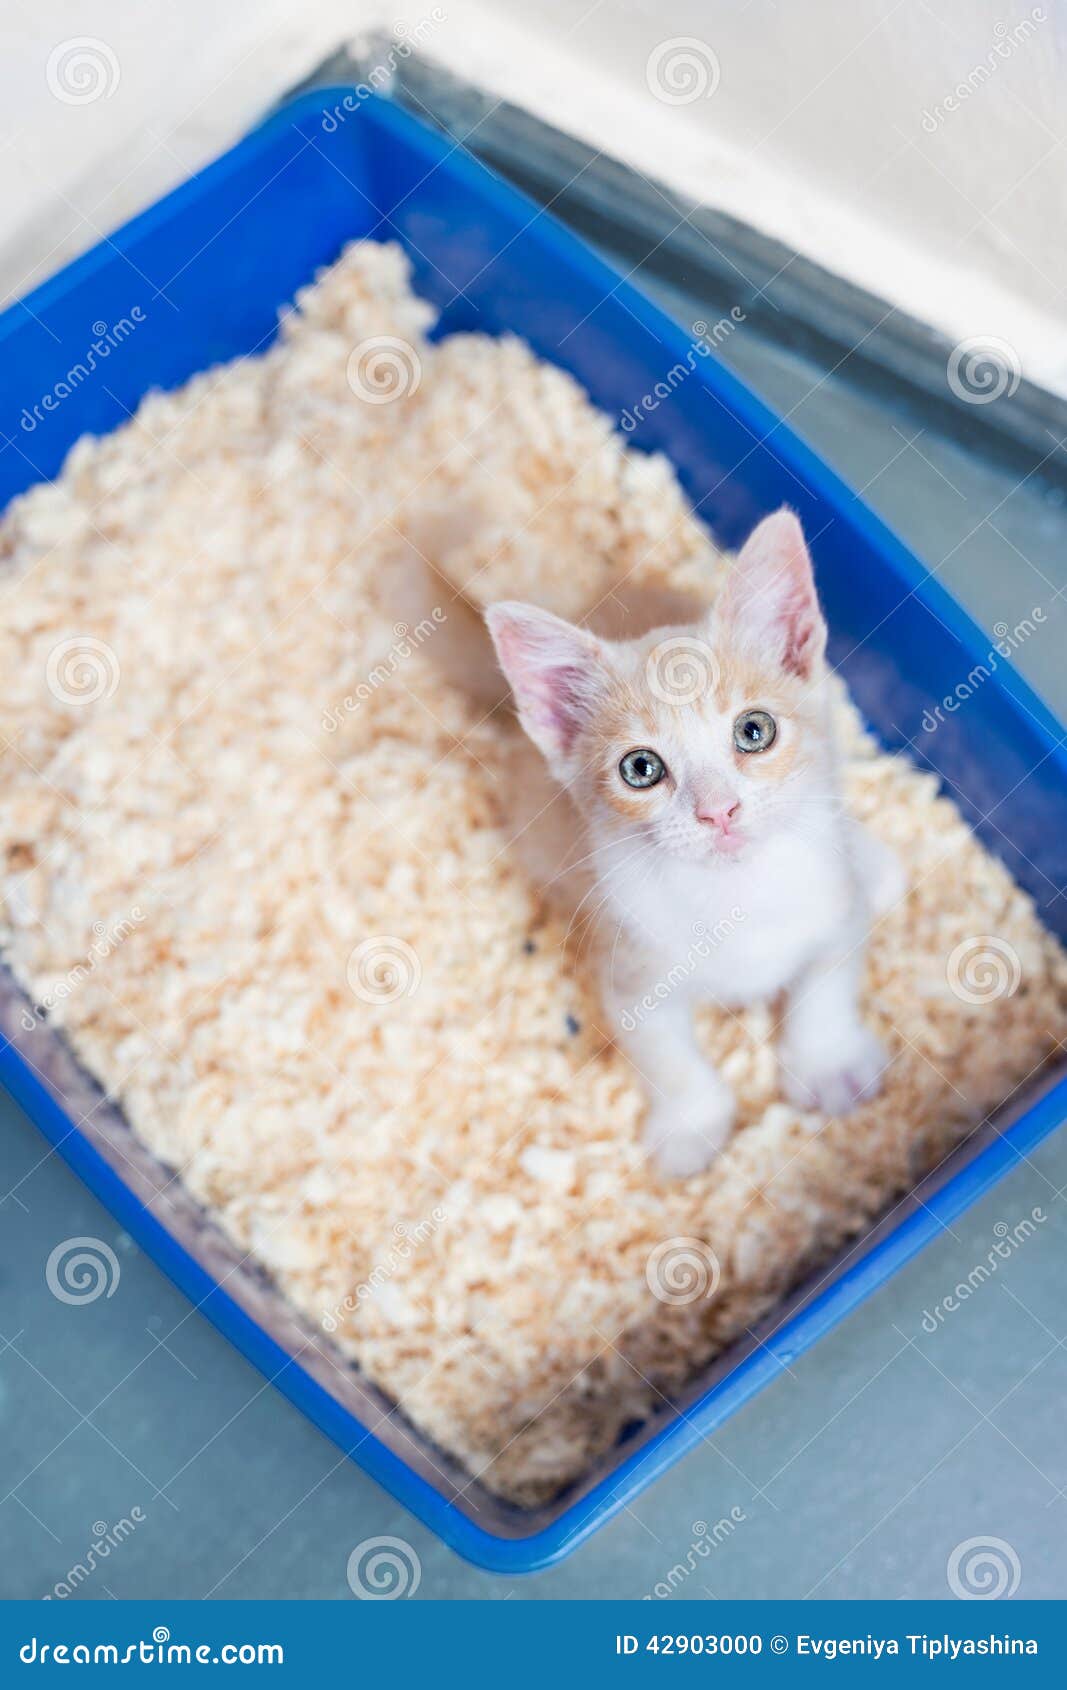 Young cat use the toilet stock photo. Image of urine 42903000